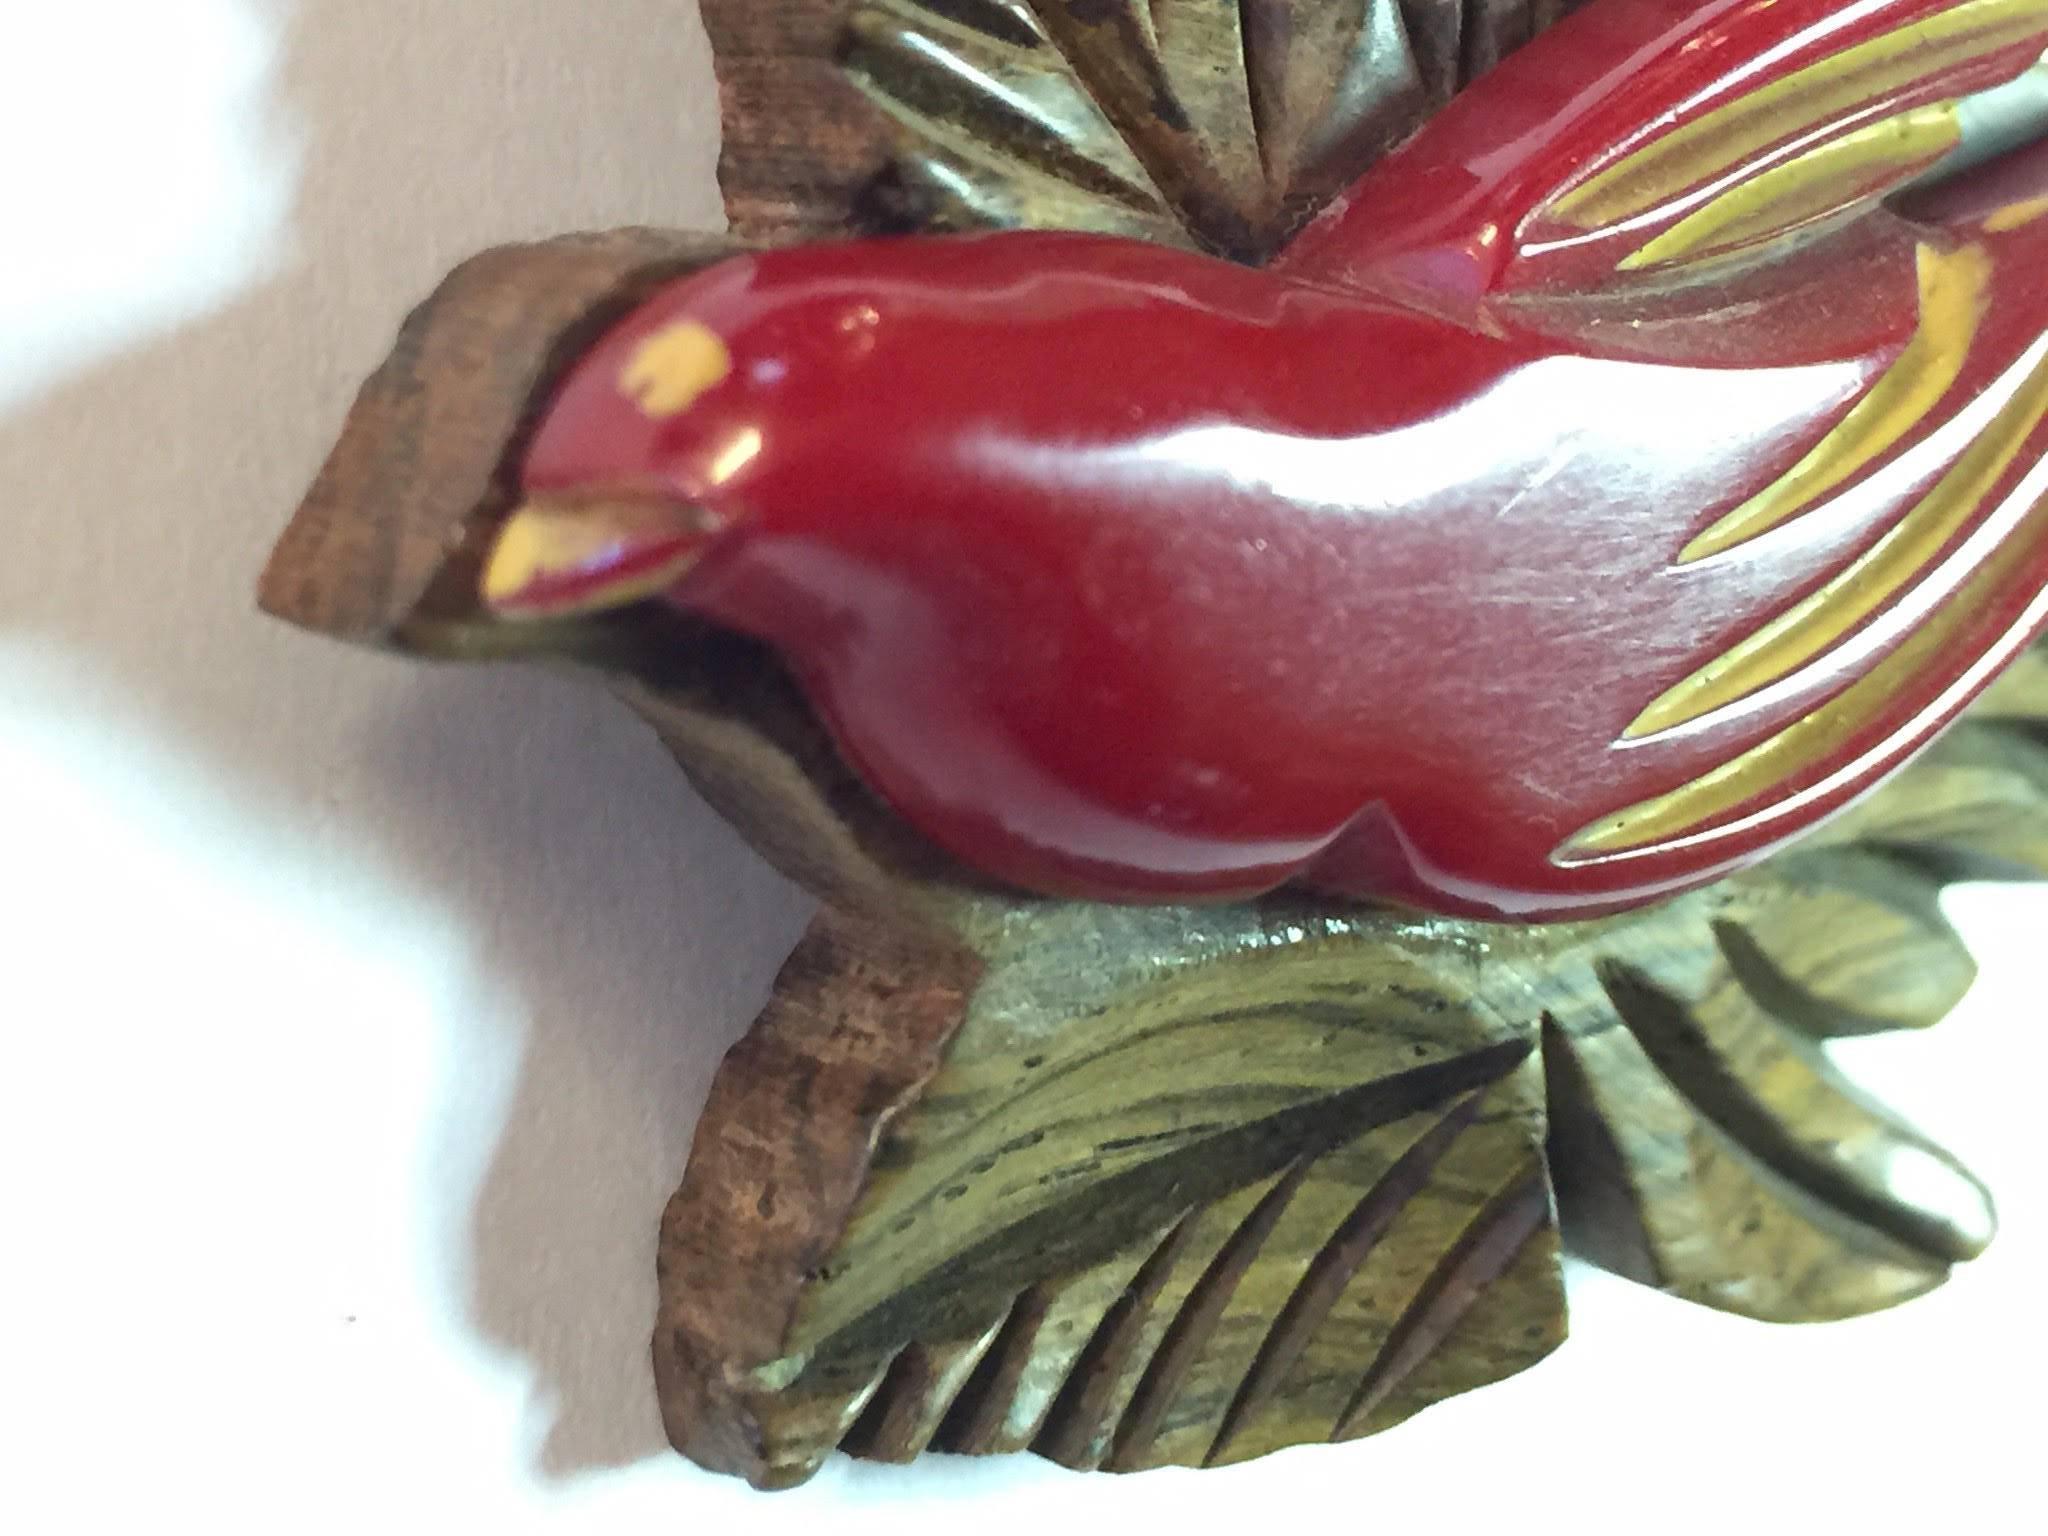 This fine example of the bakelite carver's art is actually a combination of bakelite and wood grommeted together: always a sporty and kicky combination! 1930s in origin, these wood laminated pins always showed off finesse and detail of carving, as